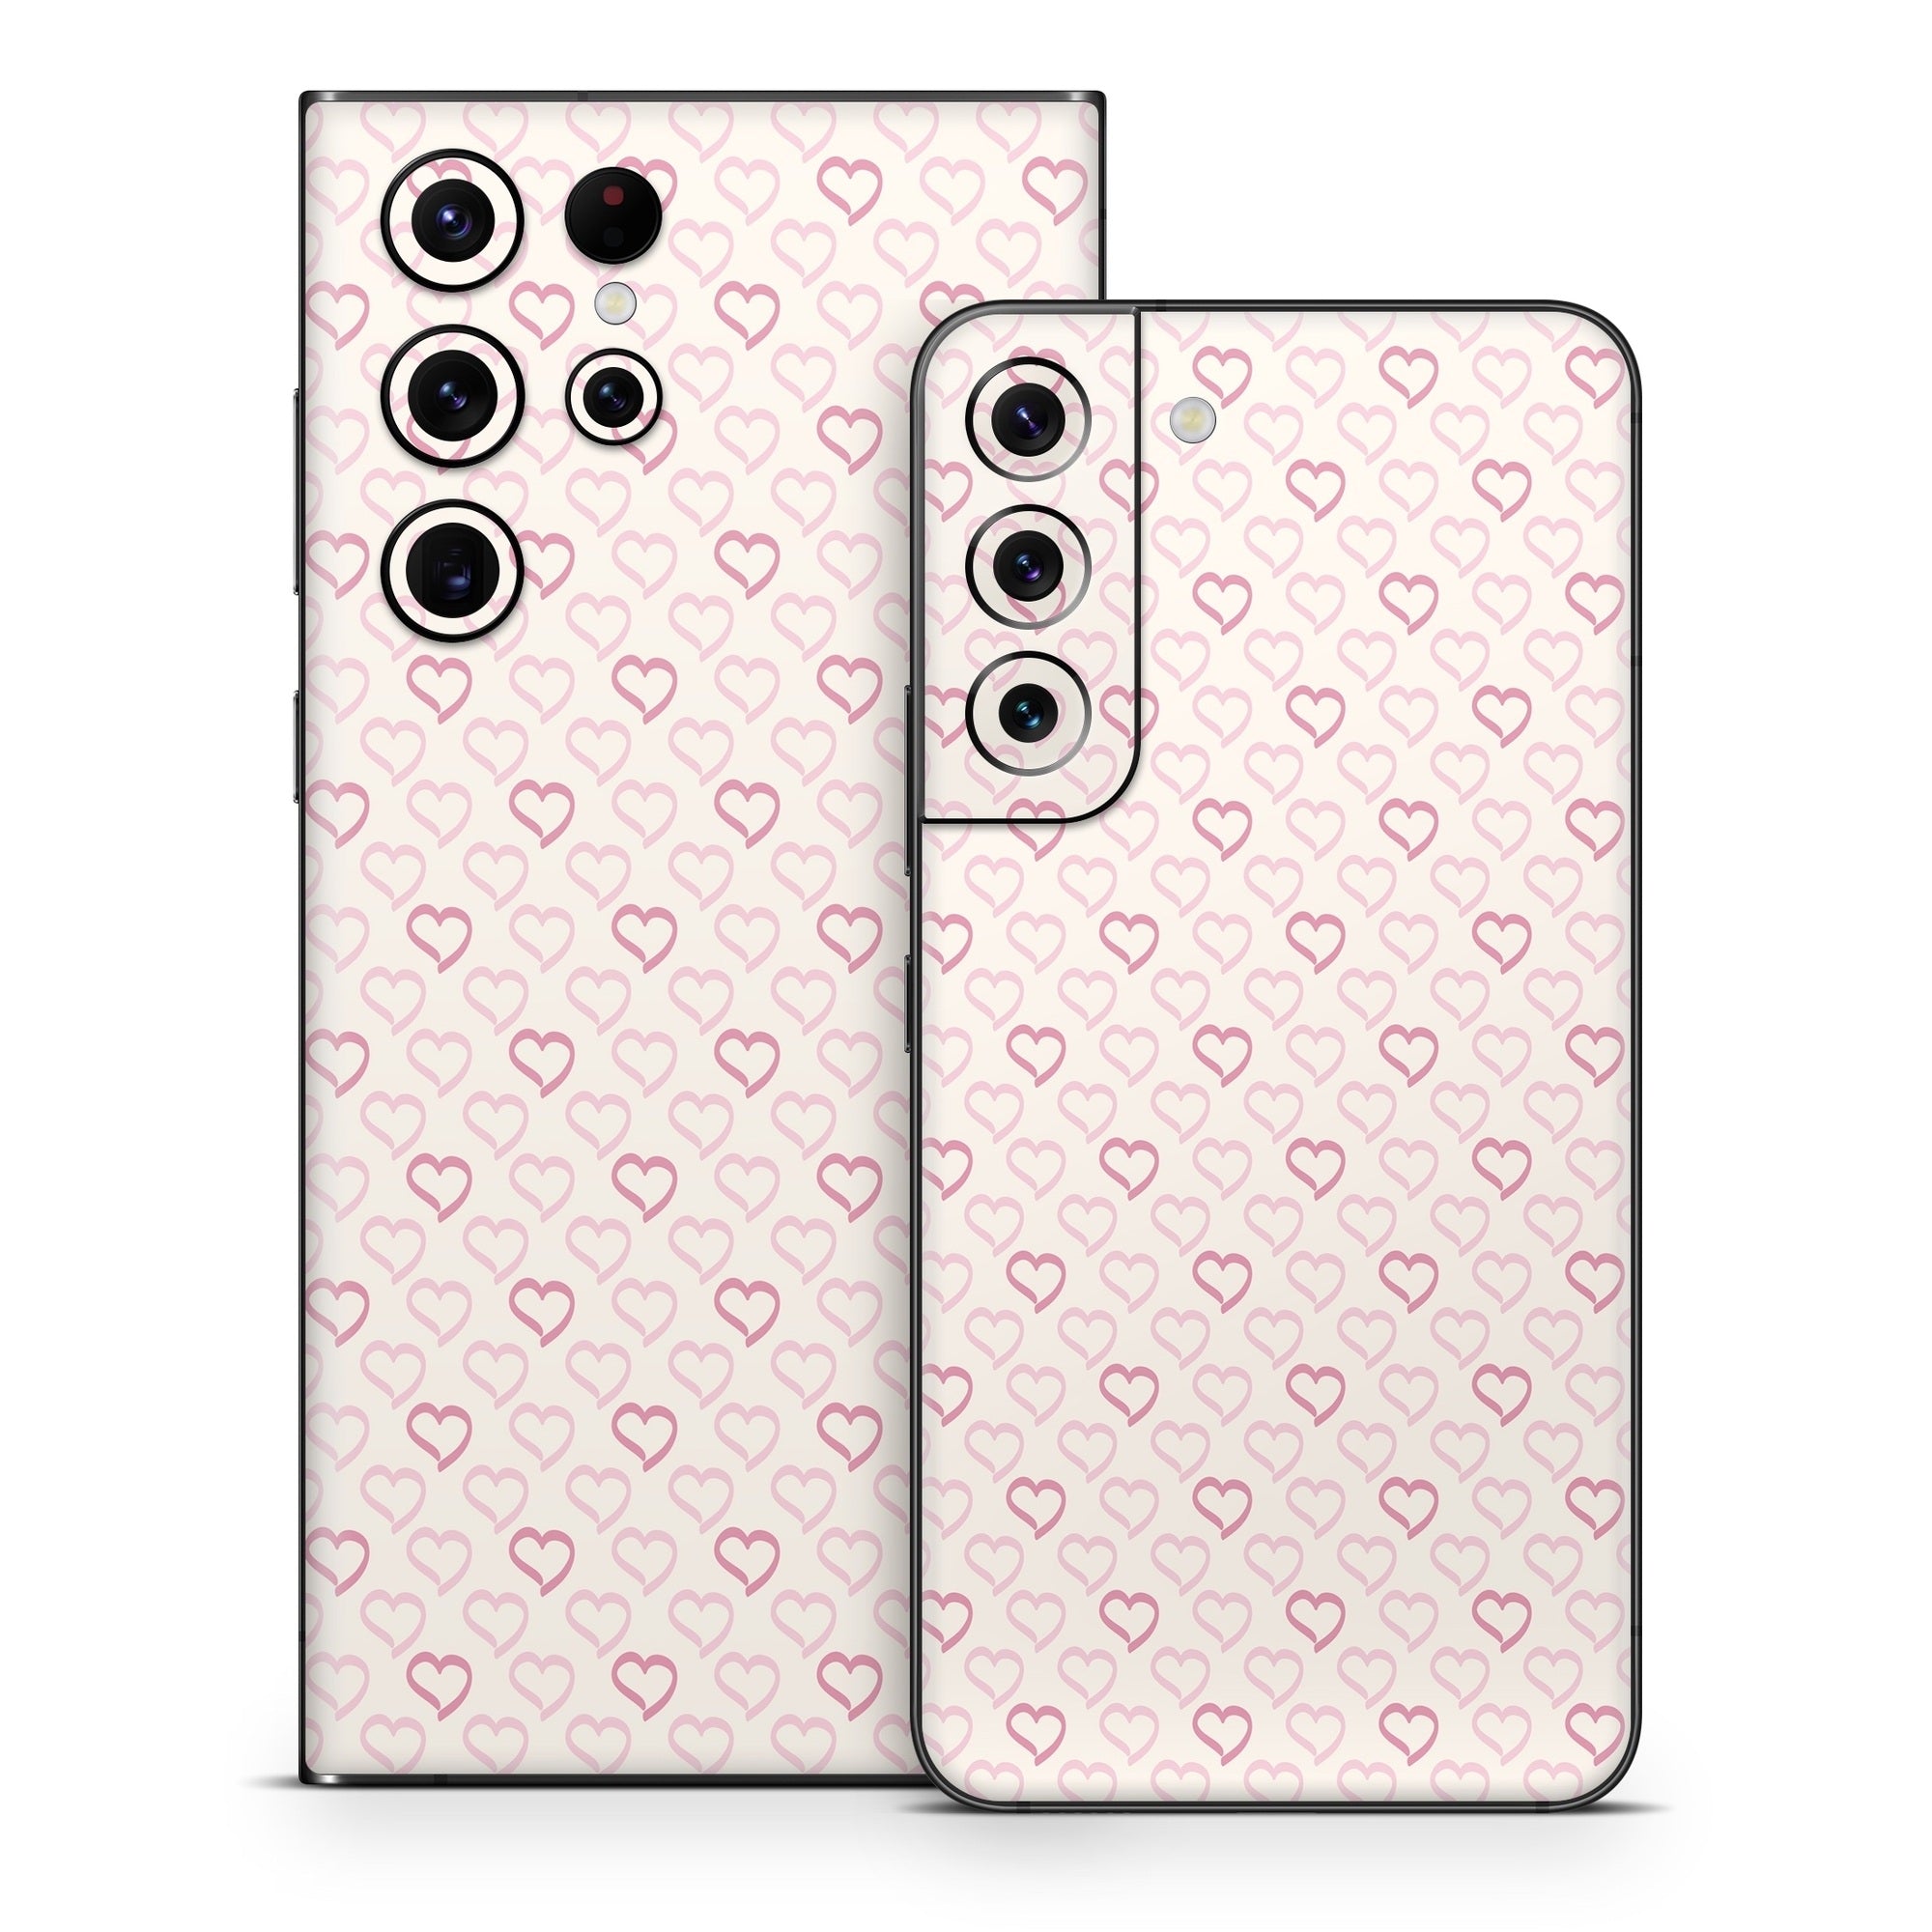 Patterned Hearts - Samsung Galaxy S22 Skin